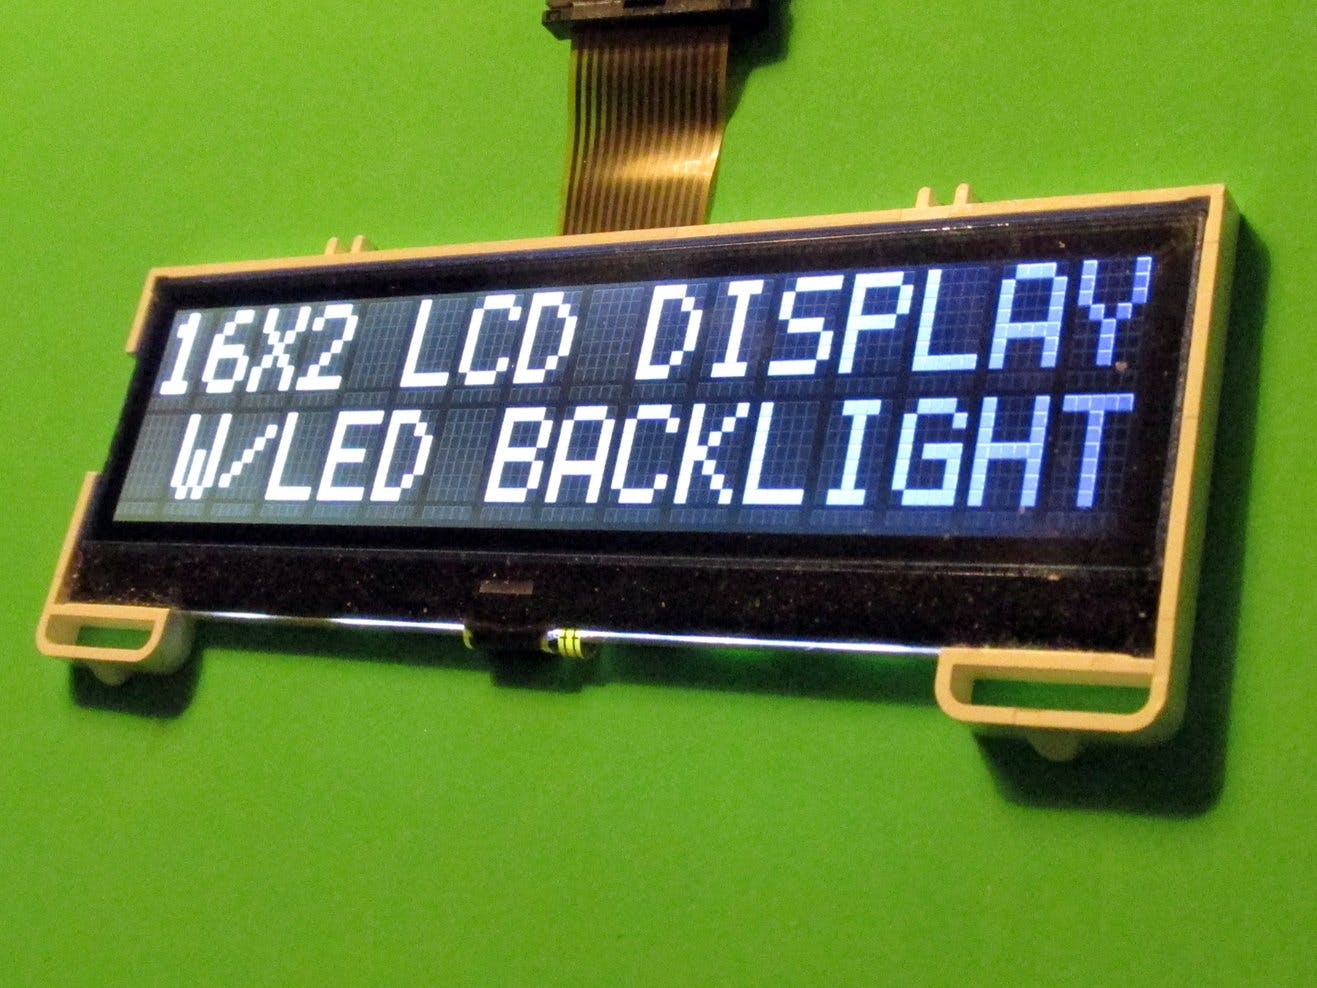 Casil OPTO1156GTW-N 16x2 COG Alphanumeric LCD Display with White LED Backlight